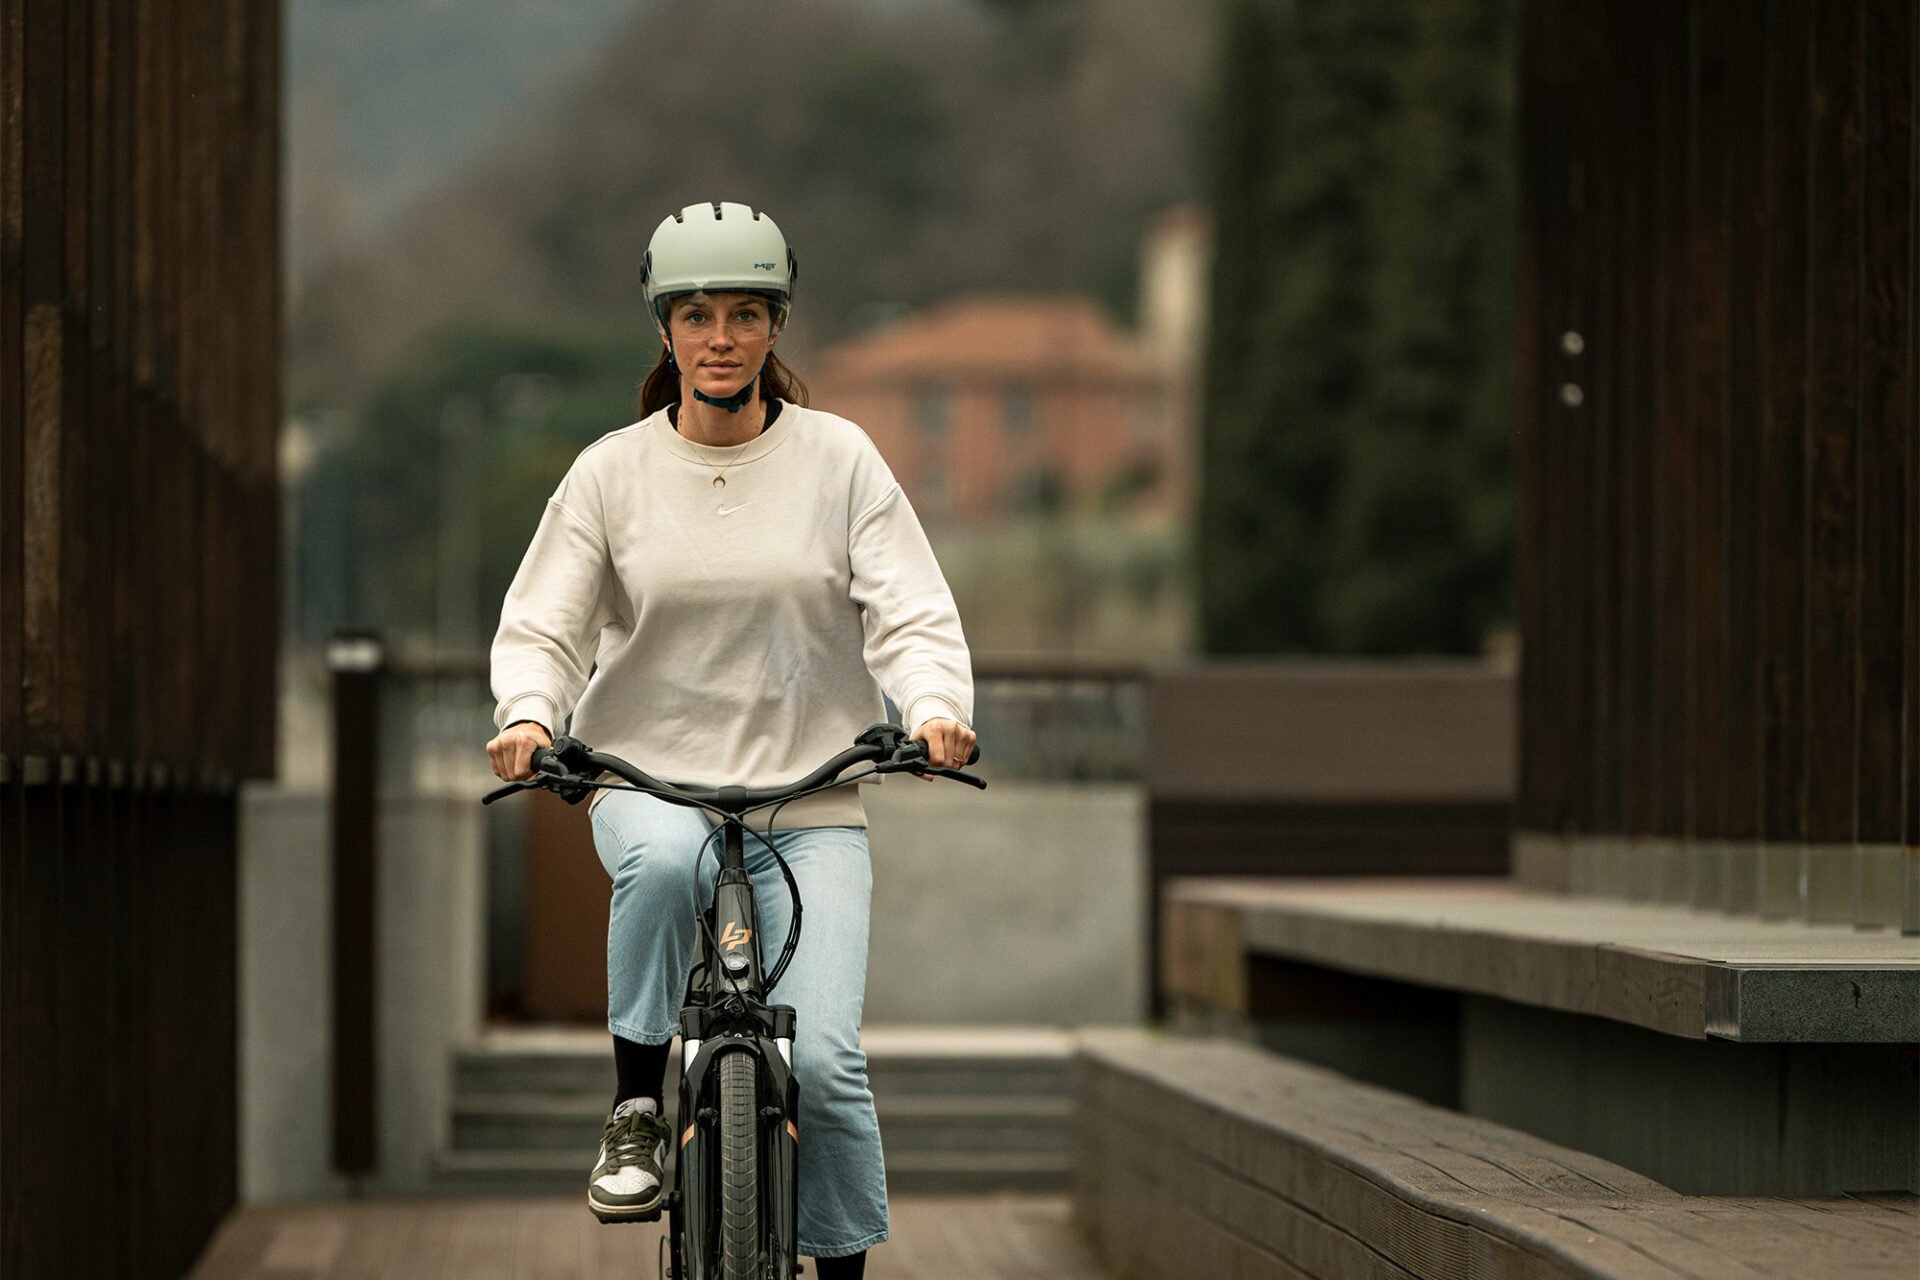 MET Vibe On Mips is an E-Bike Urban Helmet with rear USB LED light and high-durability adjustable windshield visor. It is NTA 8776 Certified.